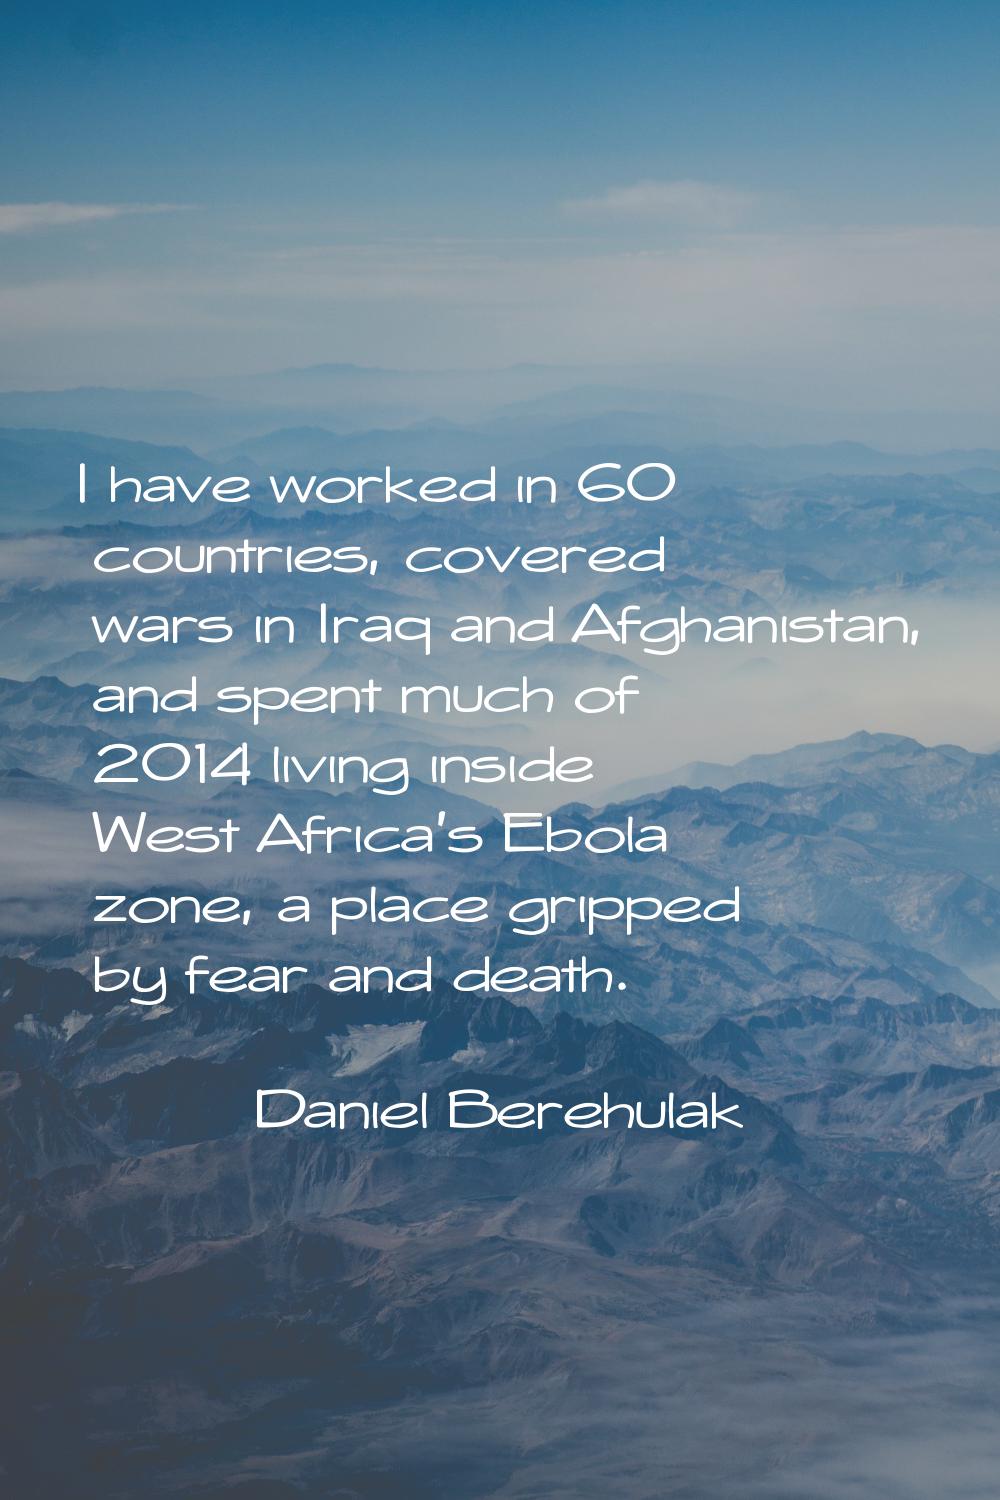 I have worked in 60 countries, covered wars in Iraq and Afghanistan, and spent much of 2014 living 